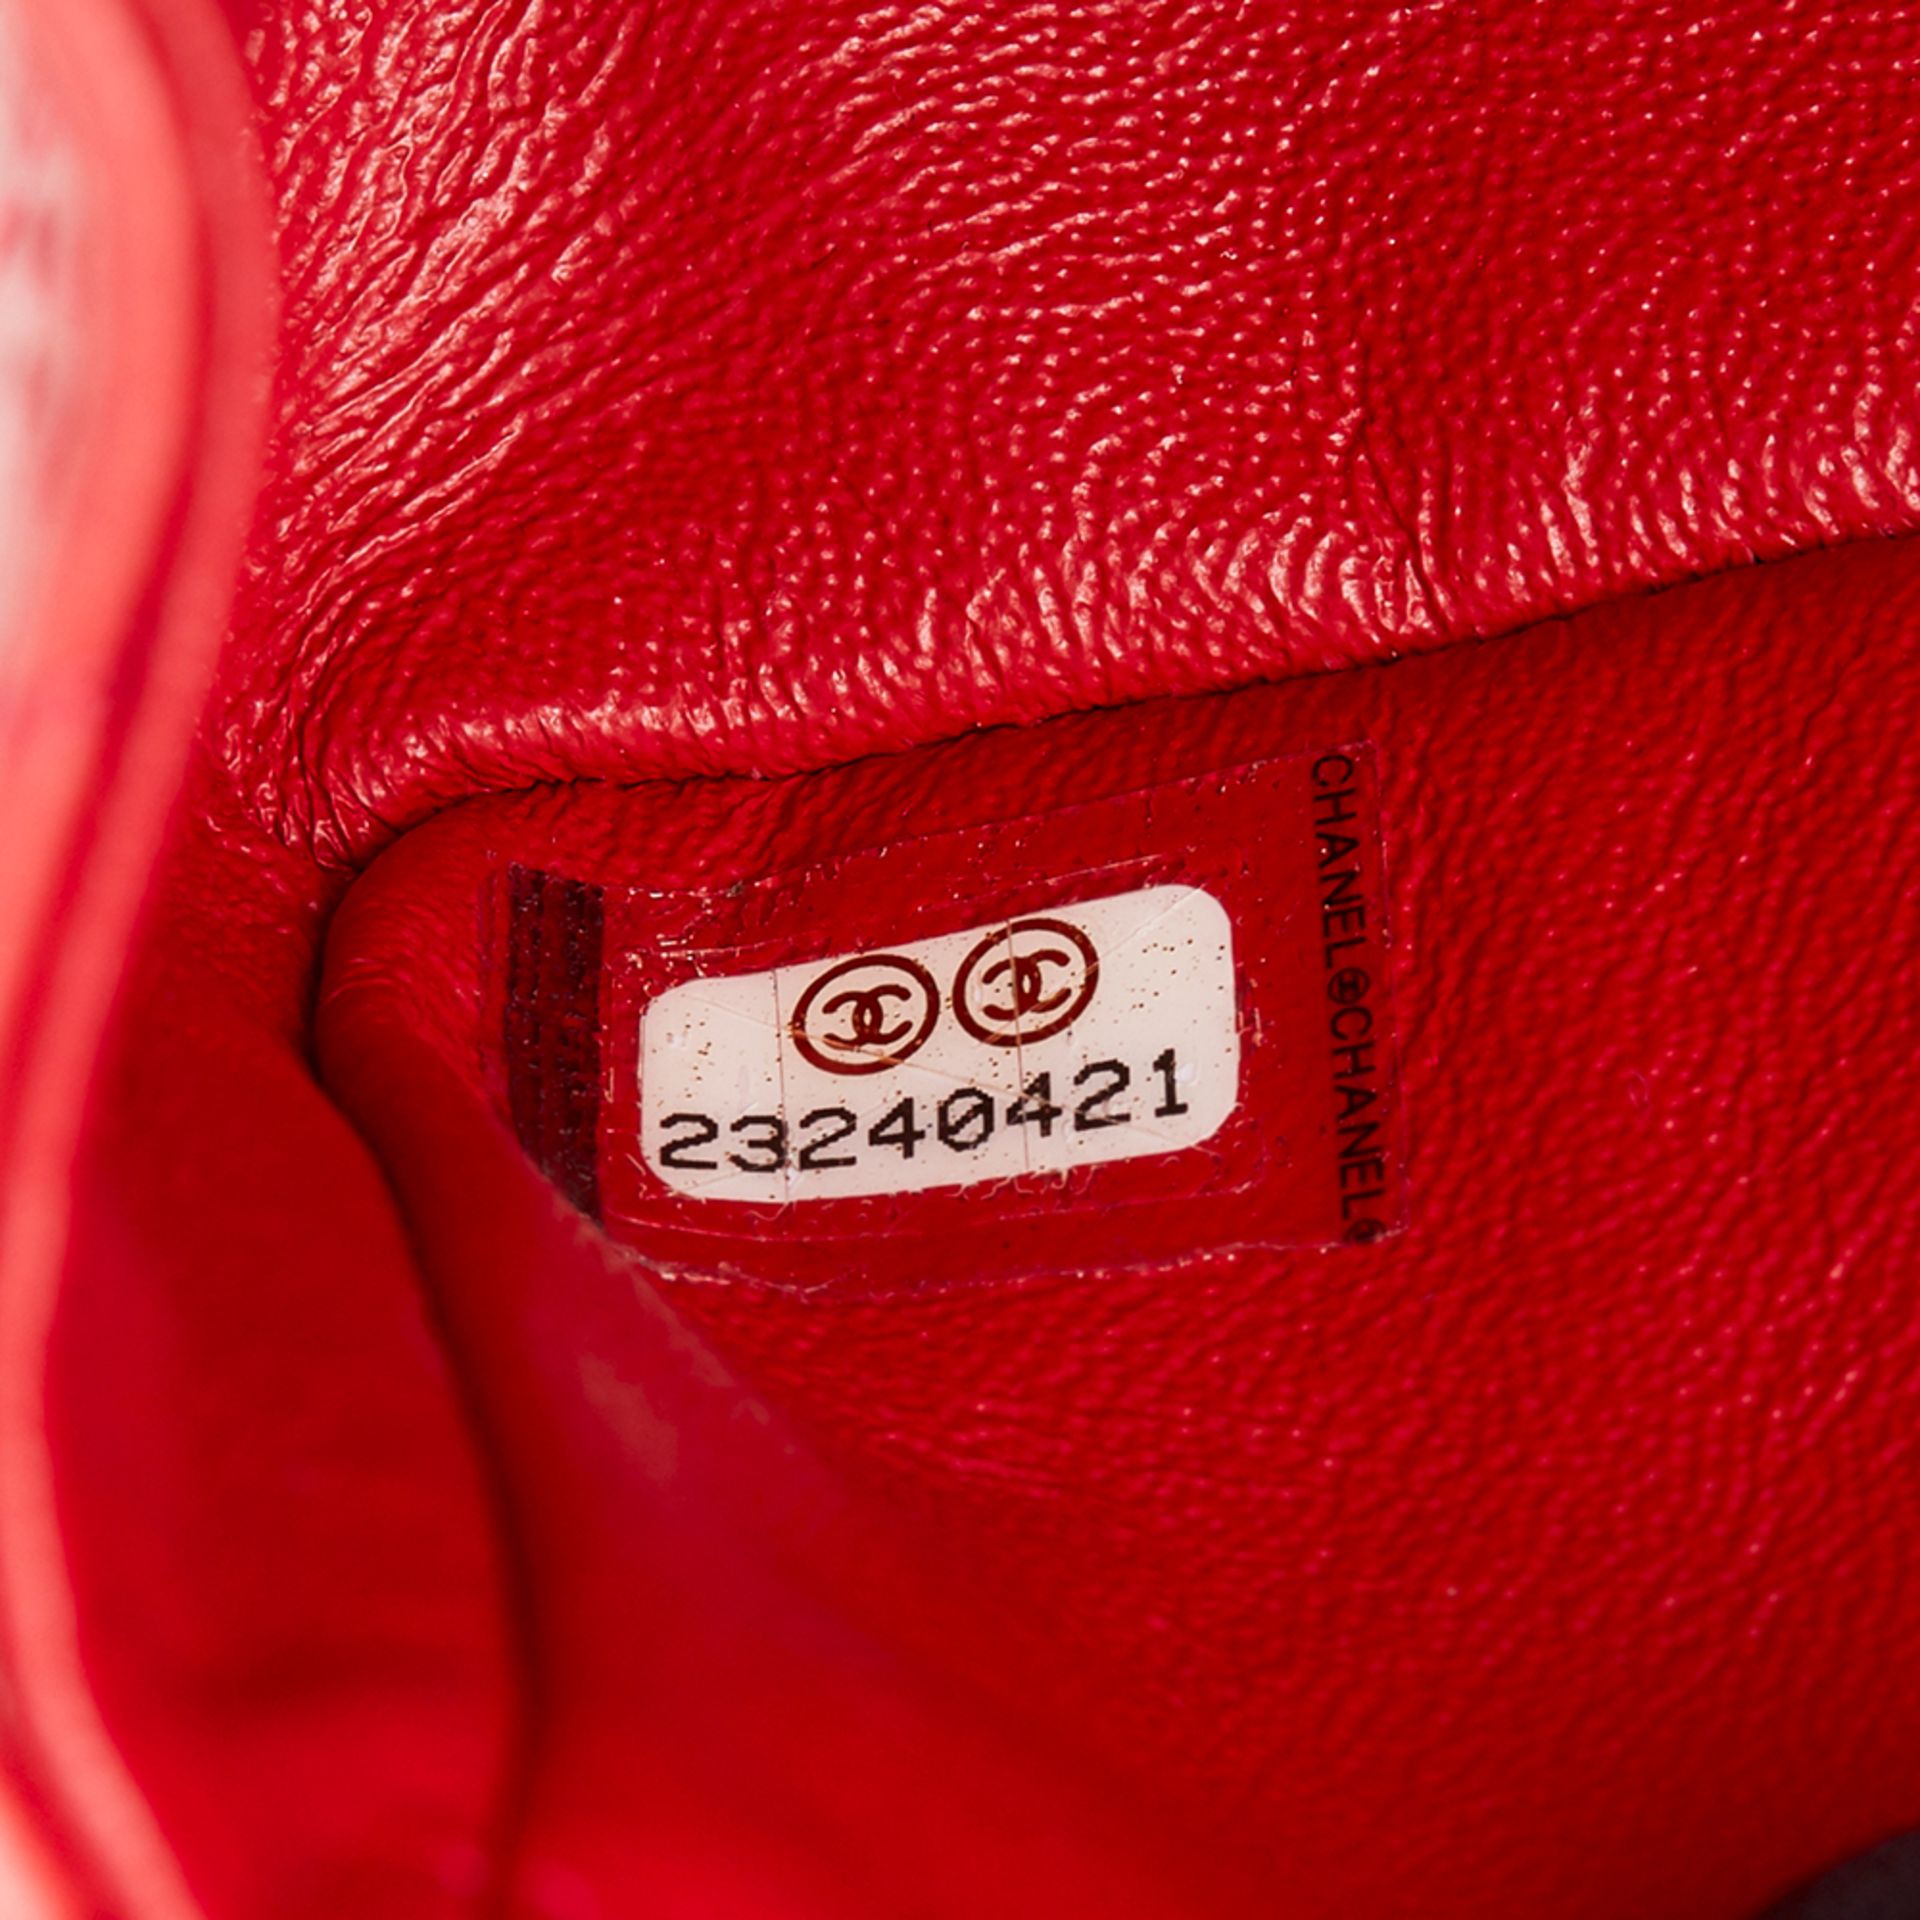 Chanel Red Quilted Calfskin Leather 2.55 Reissue 224 Double Flap Bag - Image 9 of 10